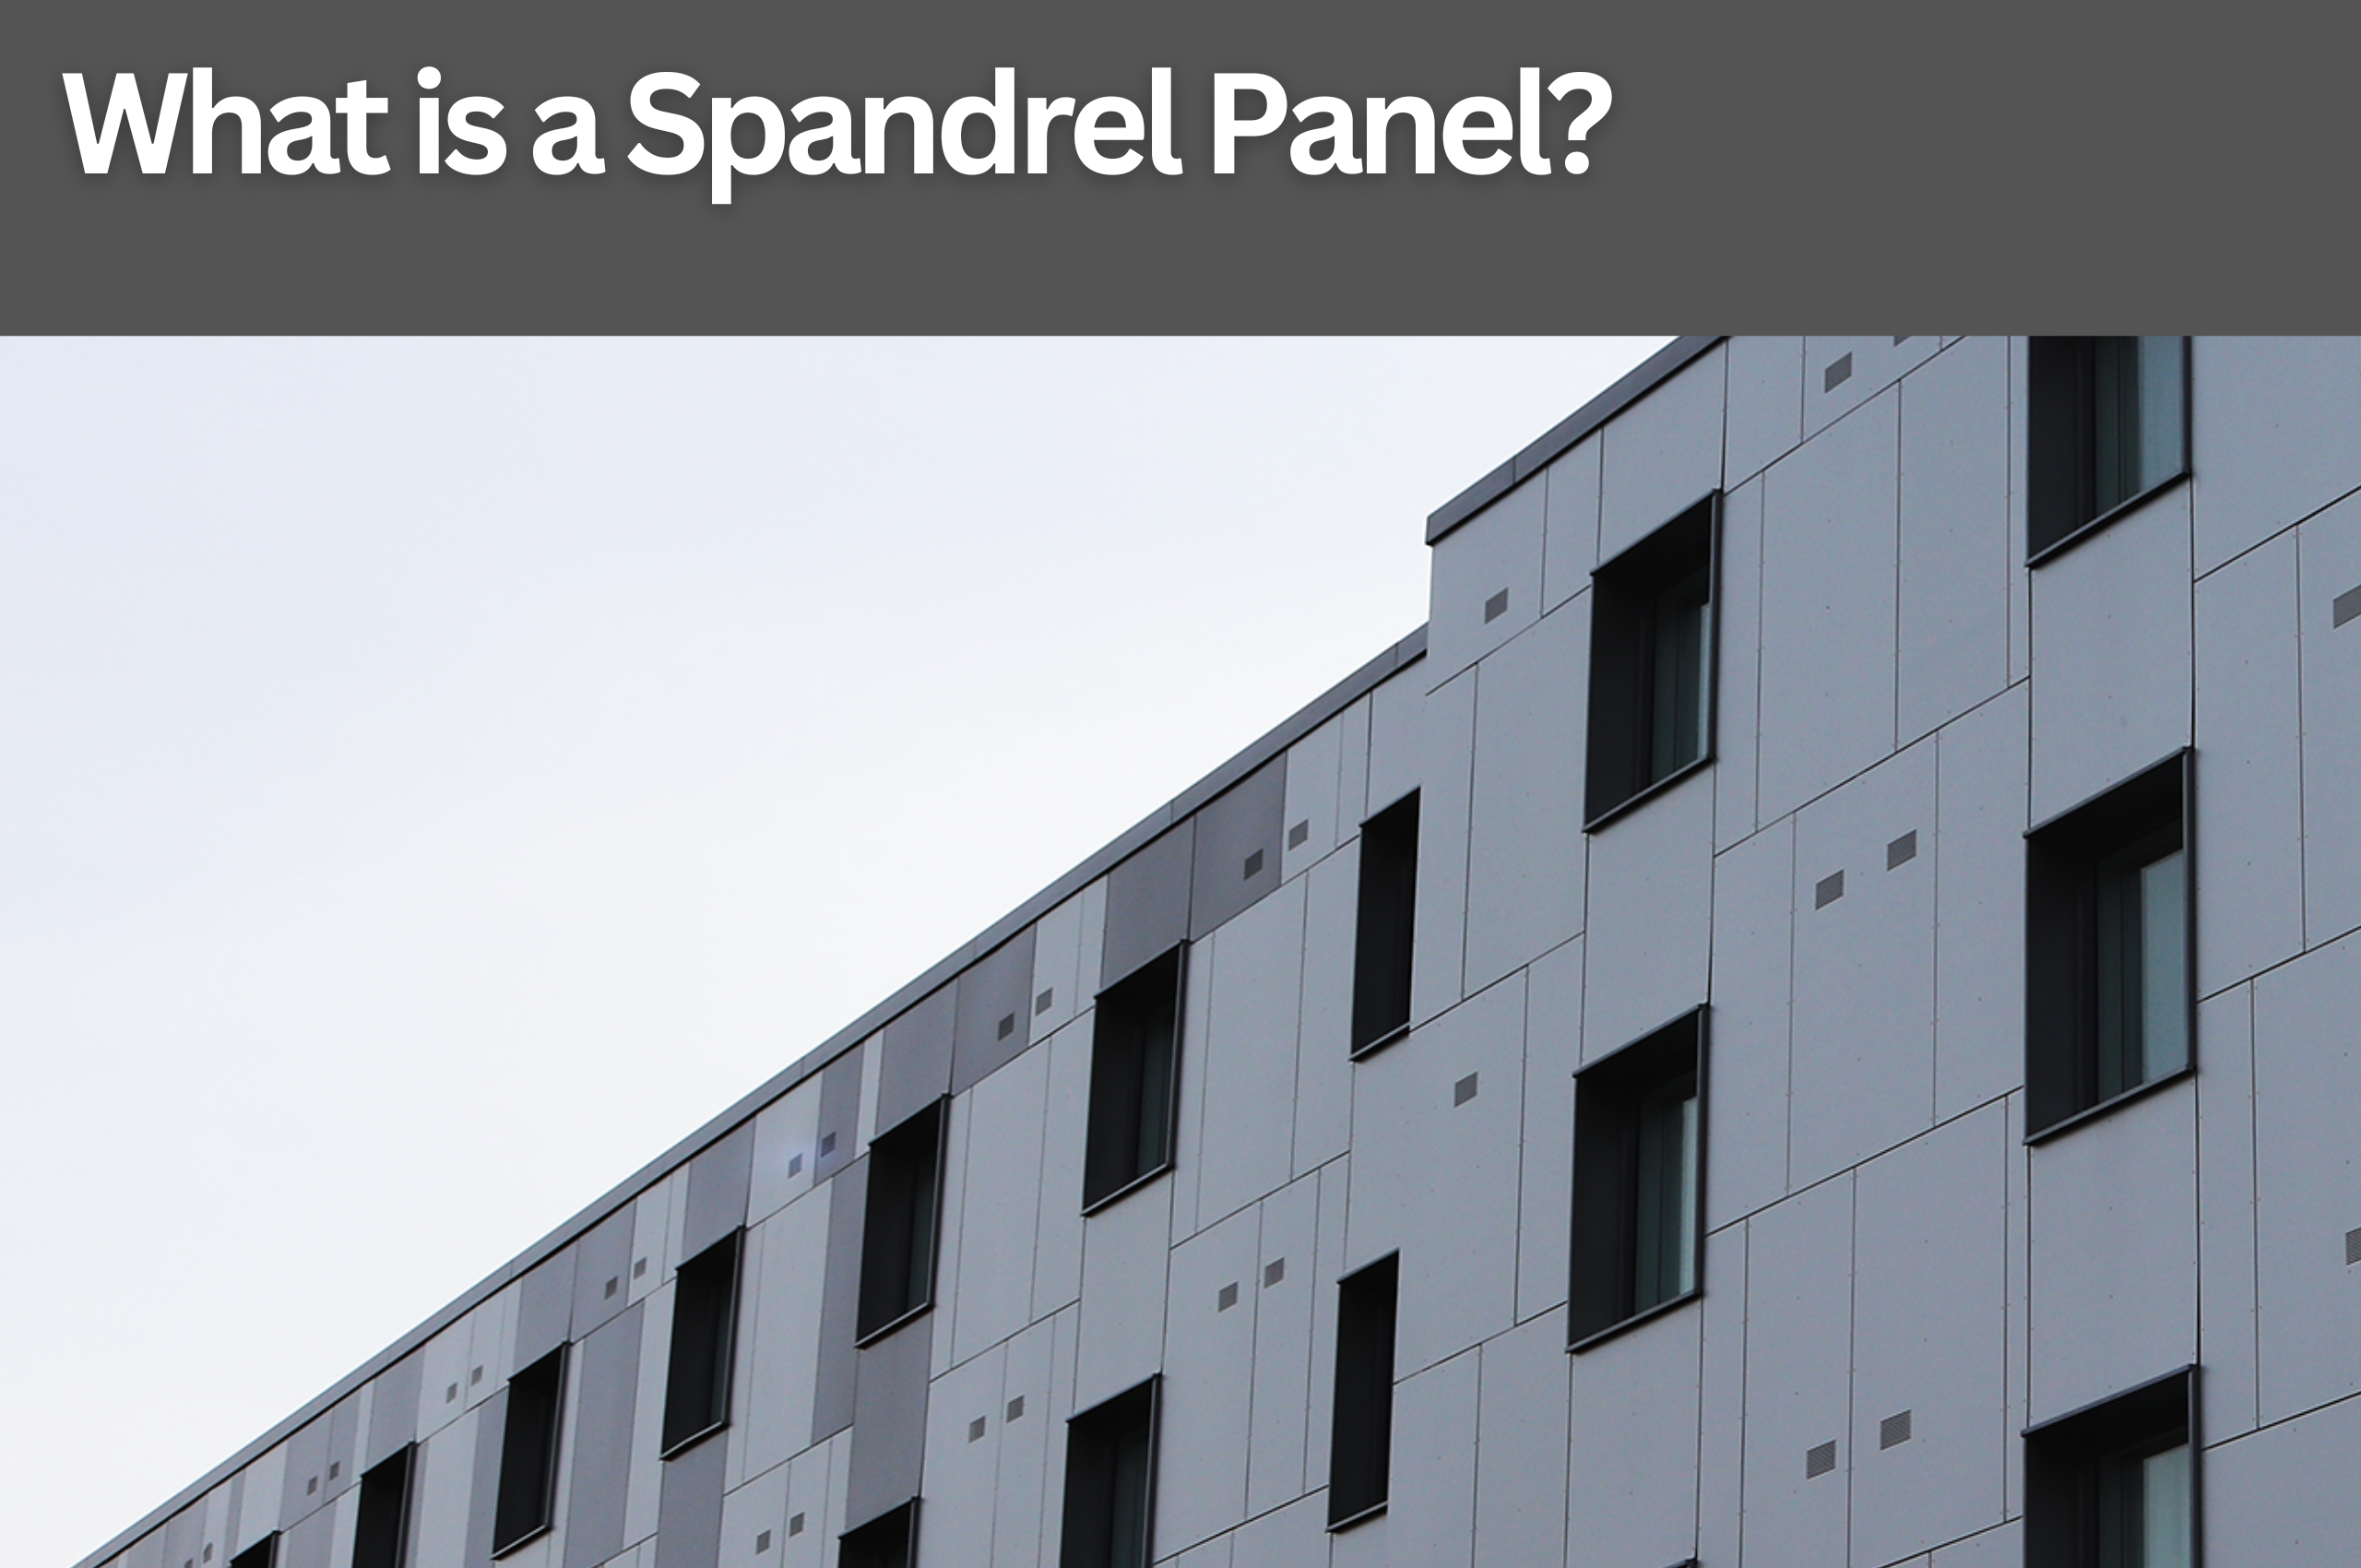 What is a Spandrel Panel?